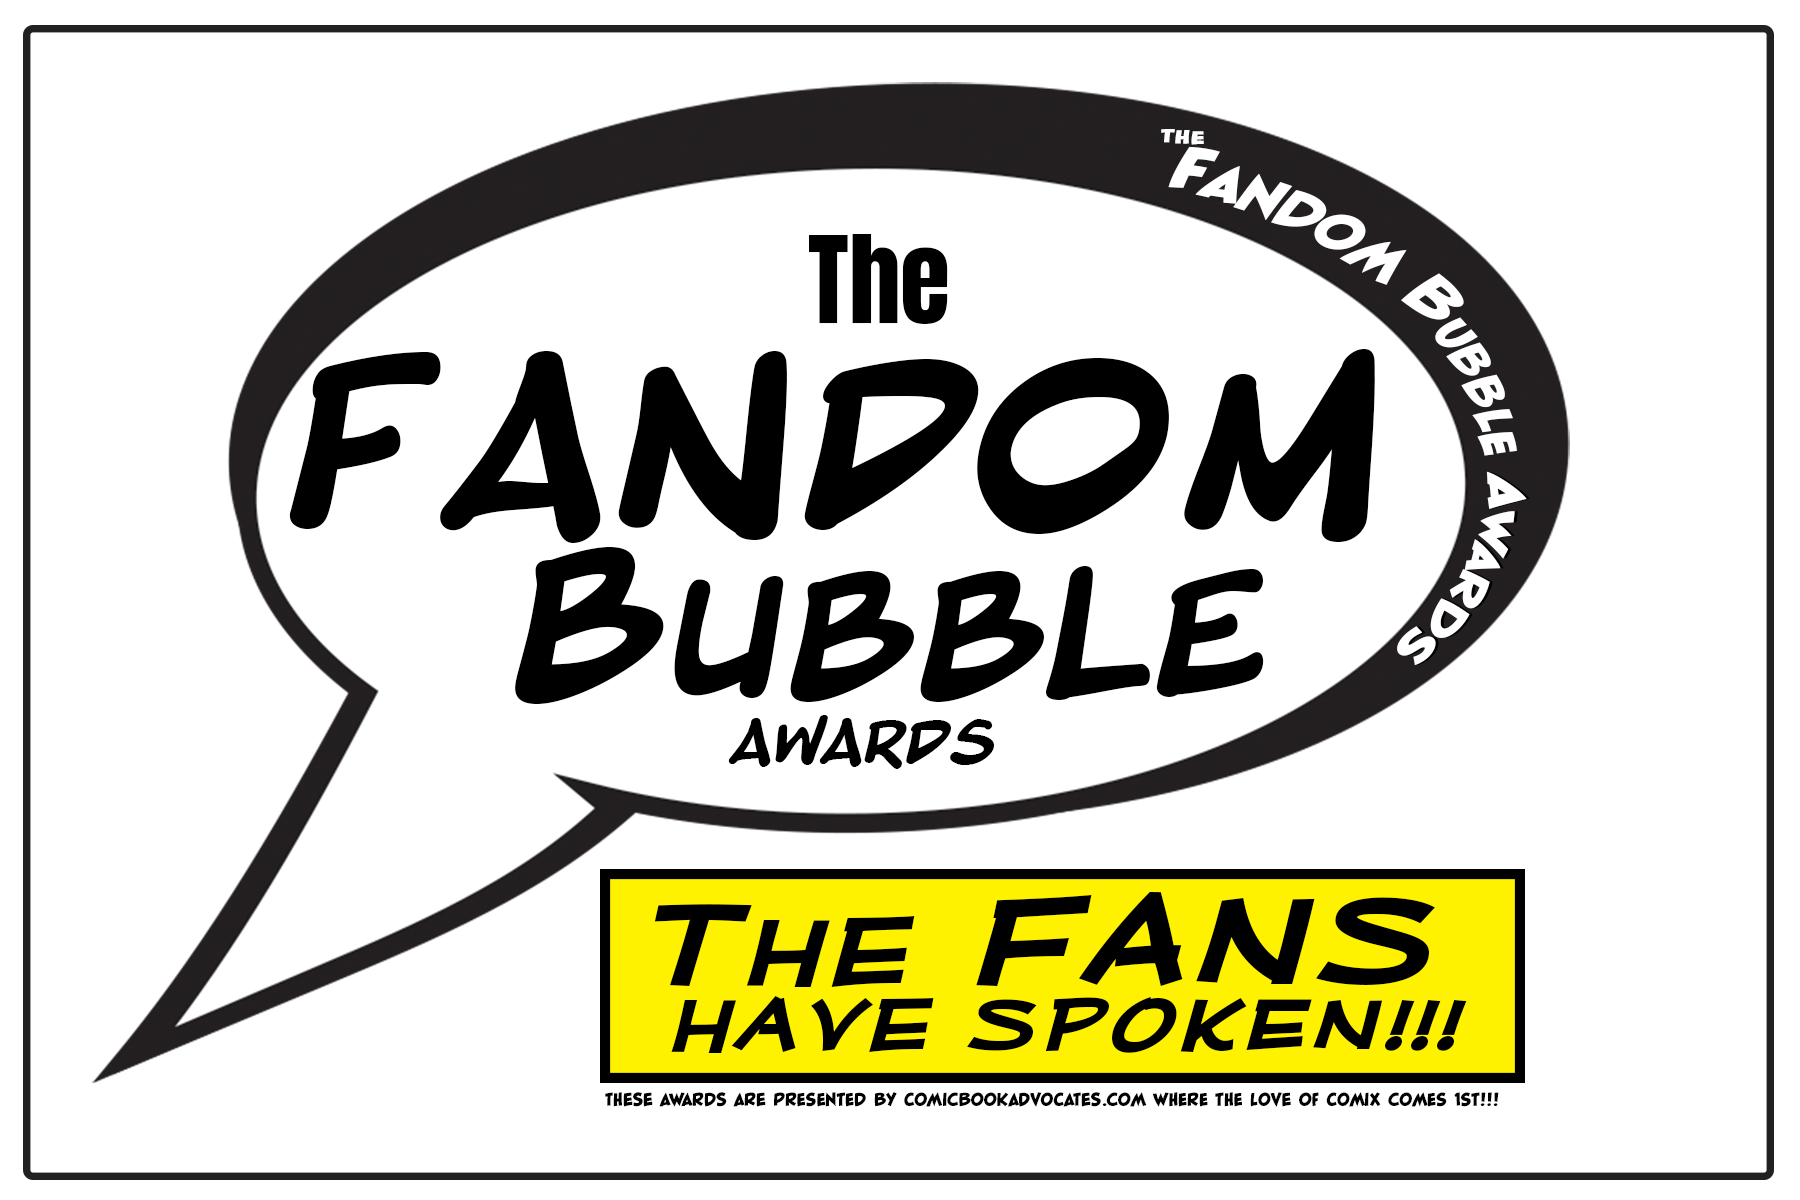 NOW THIS: FANDOM BUBBLE AWARD-Anthology of the year